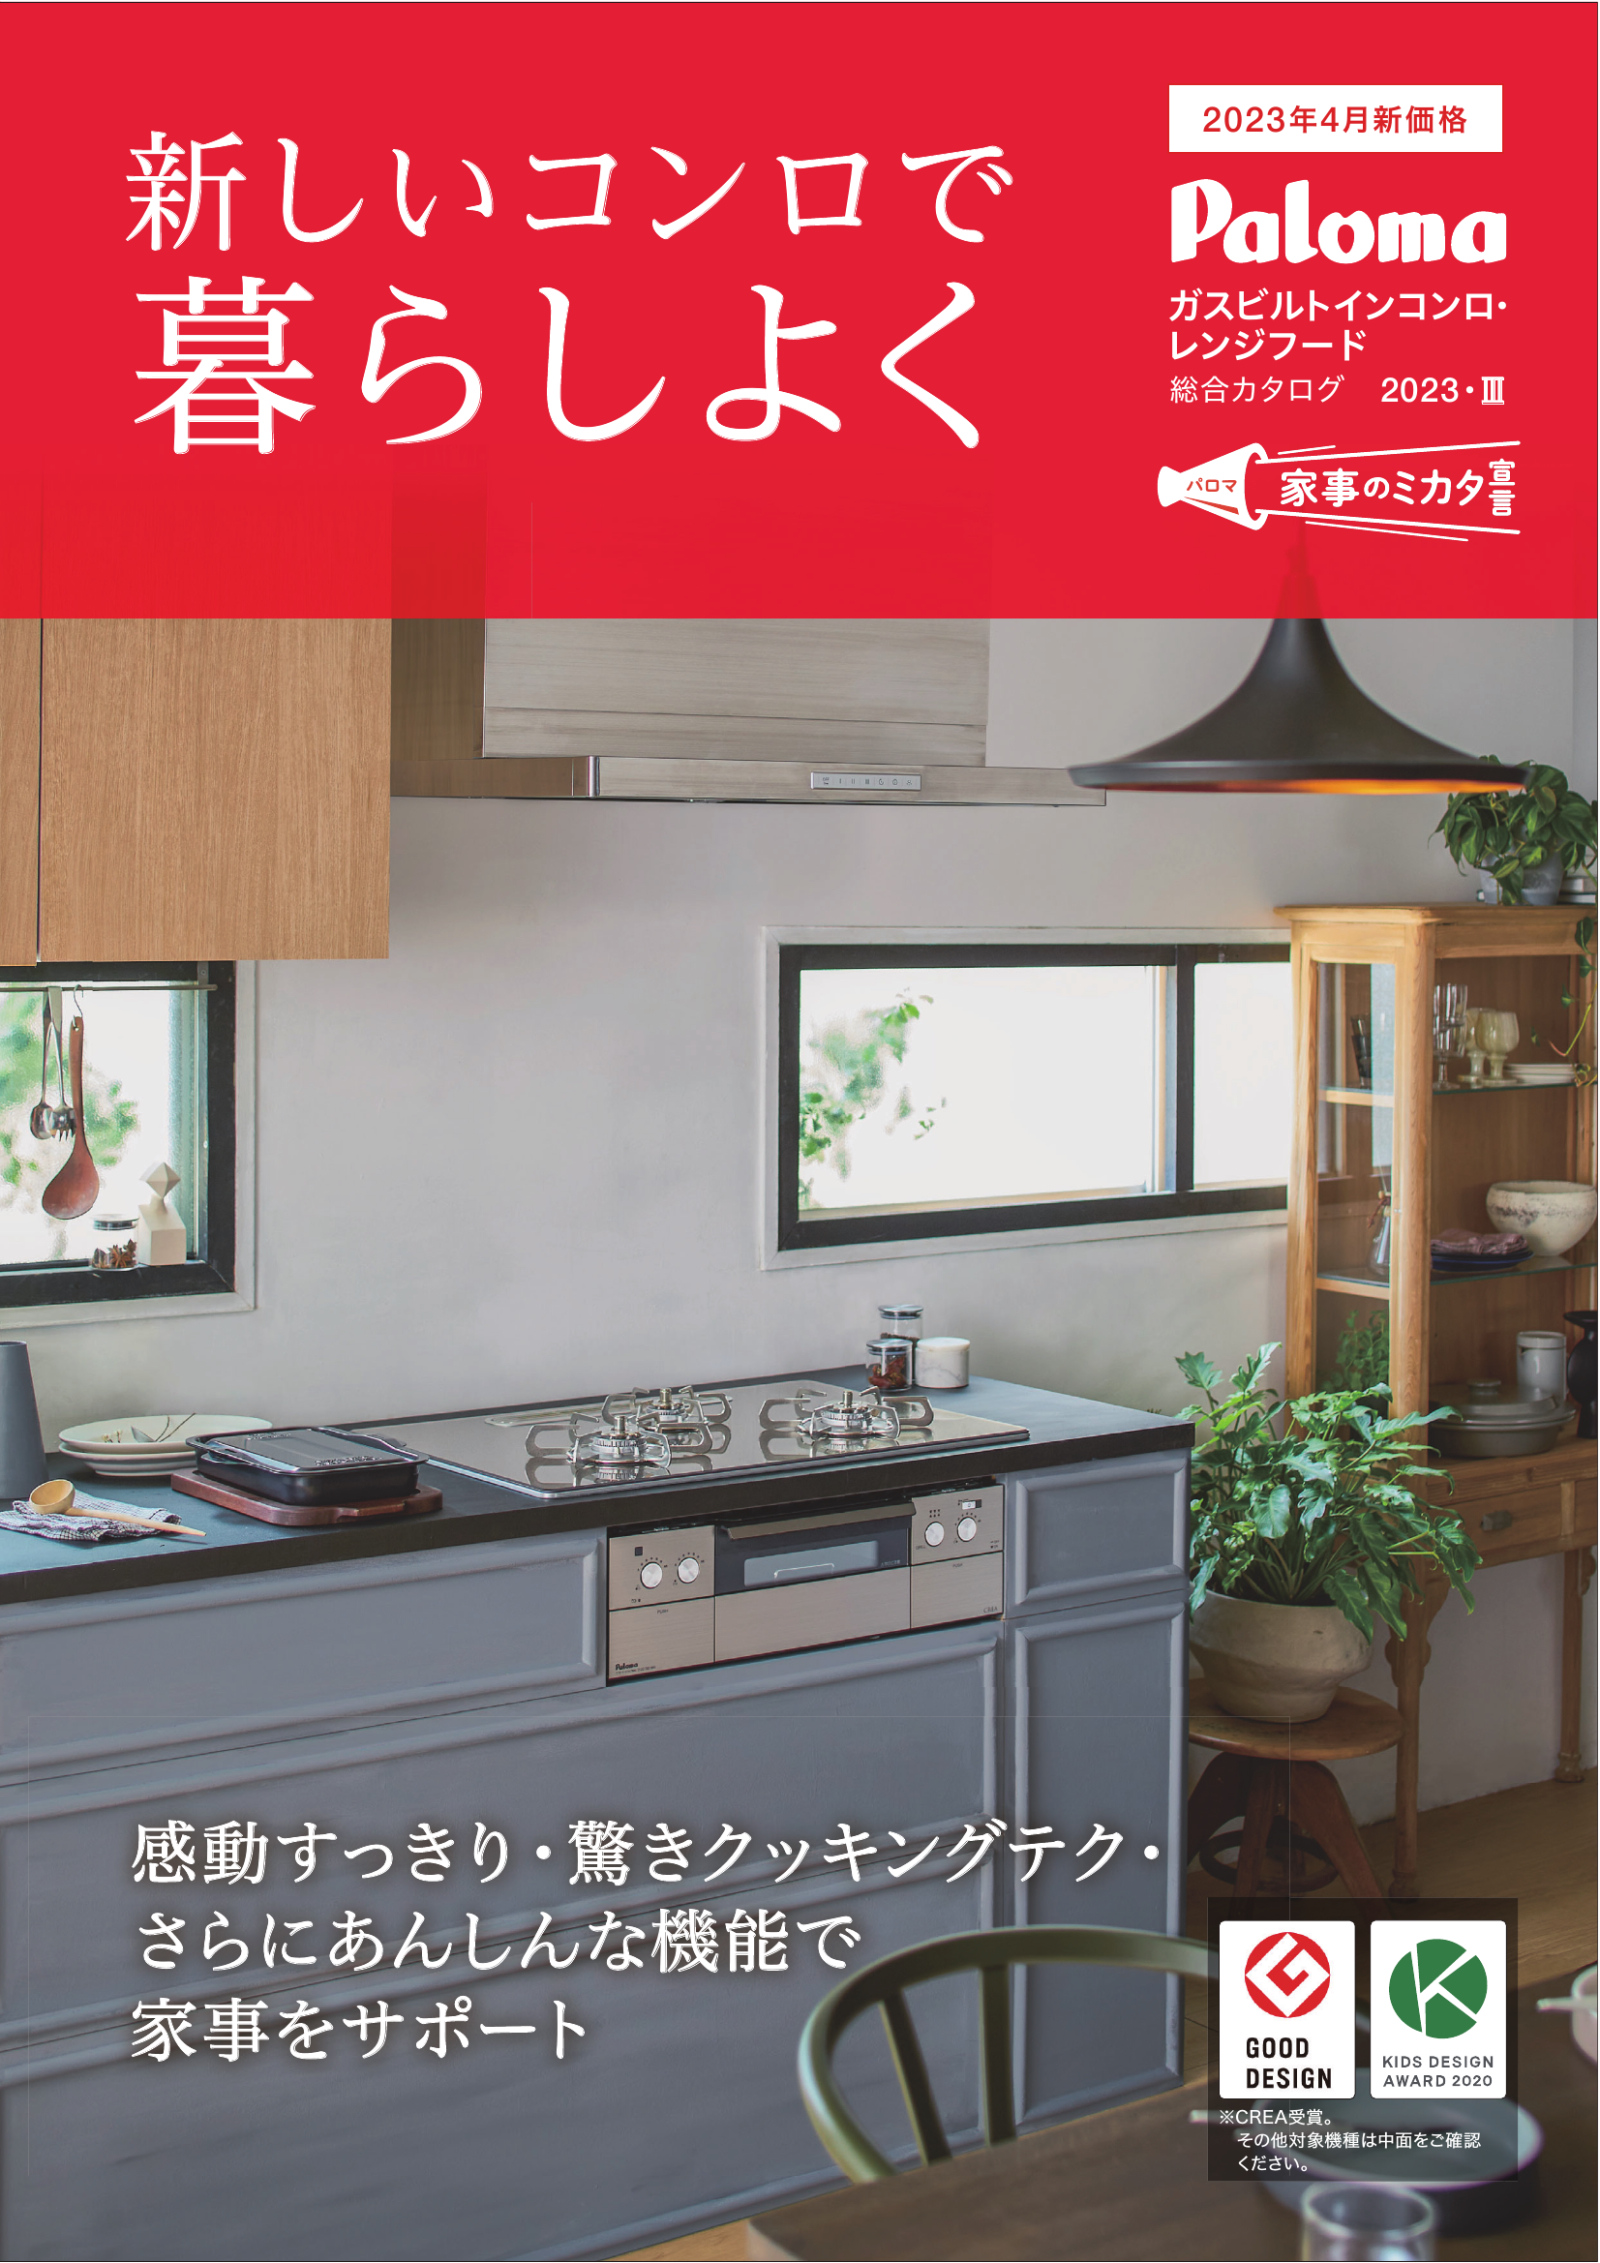 Gas Built in Hob - Japanese version